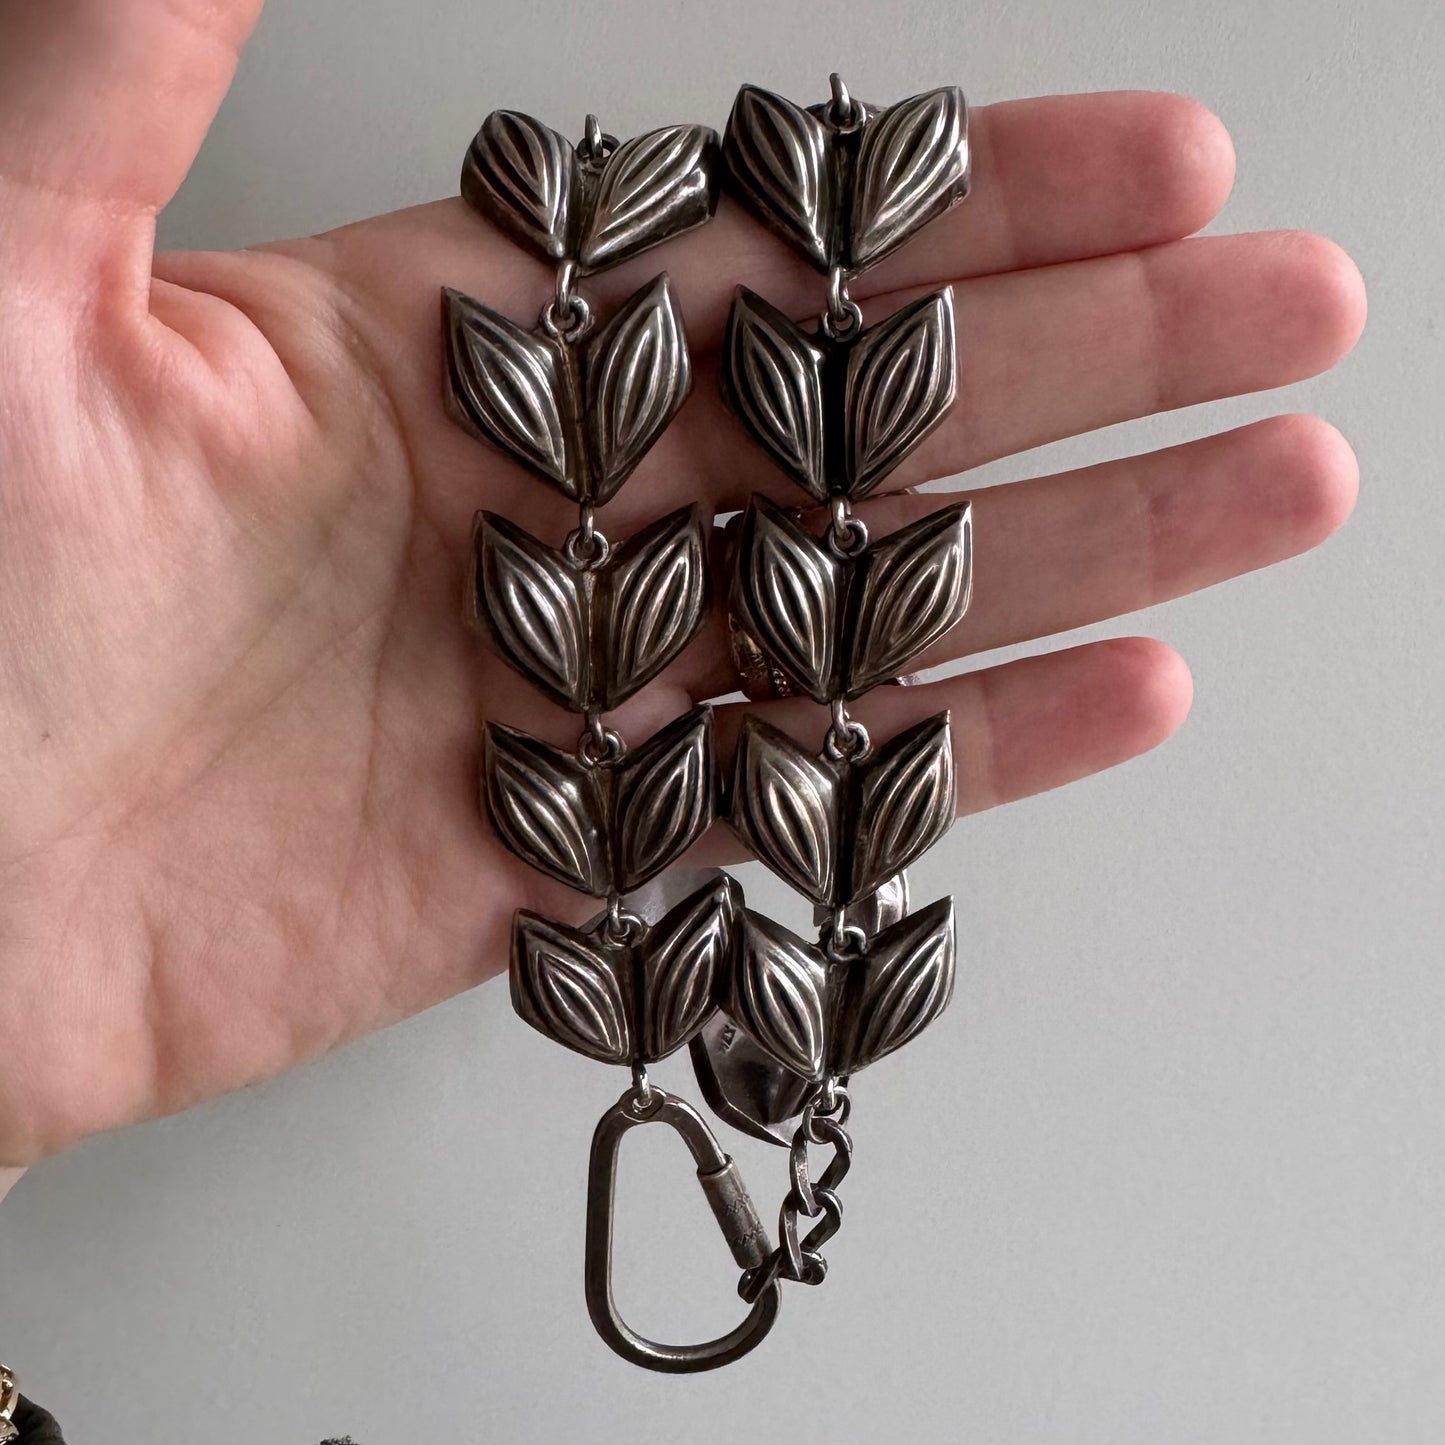 reimagined V I N T A G E // puffy leafy links / sterling silver fancy link Mexico necklace with charm holder clasp / 19", 51g